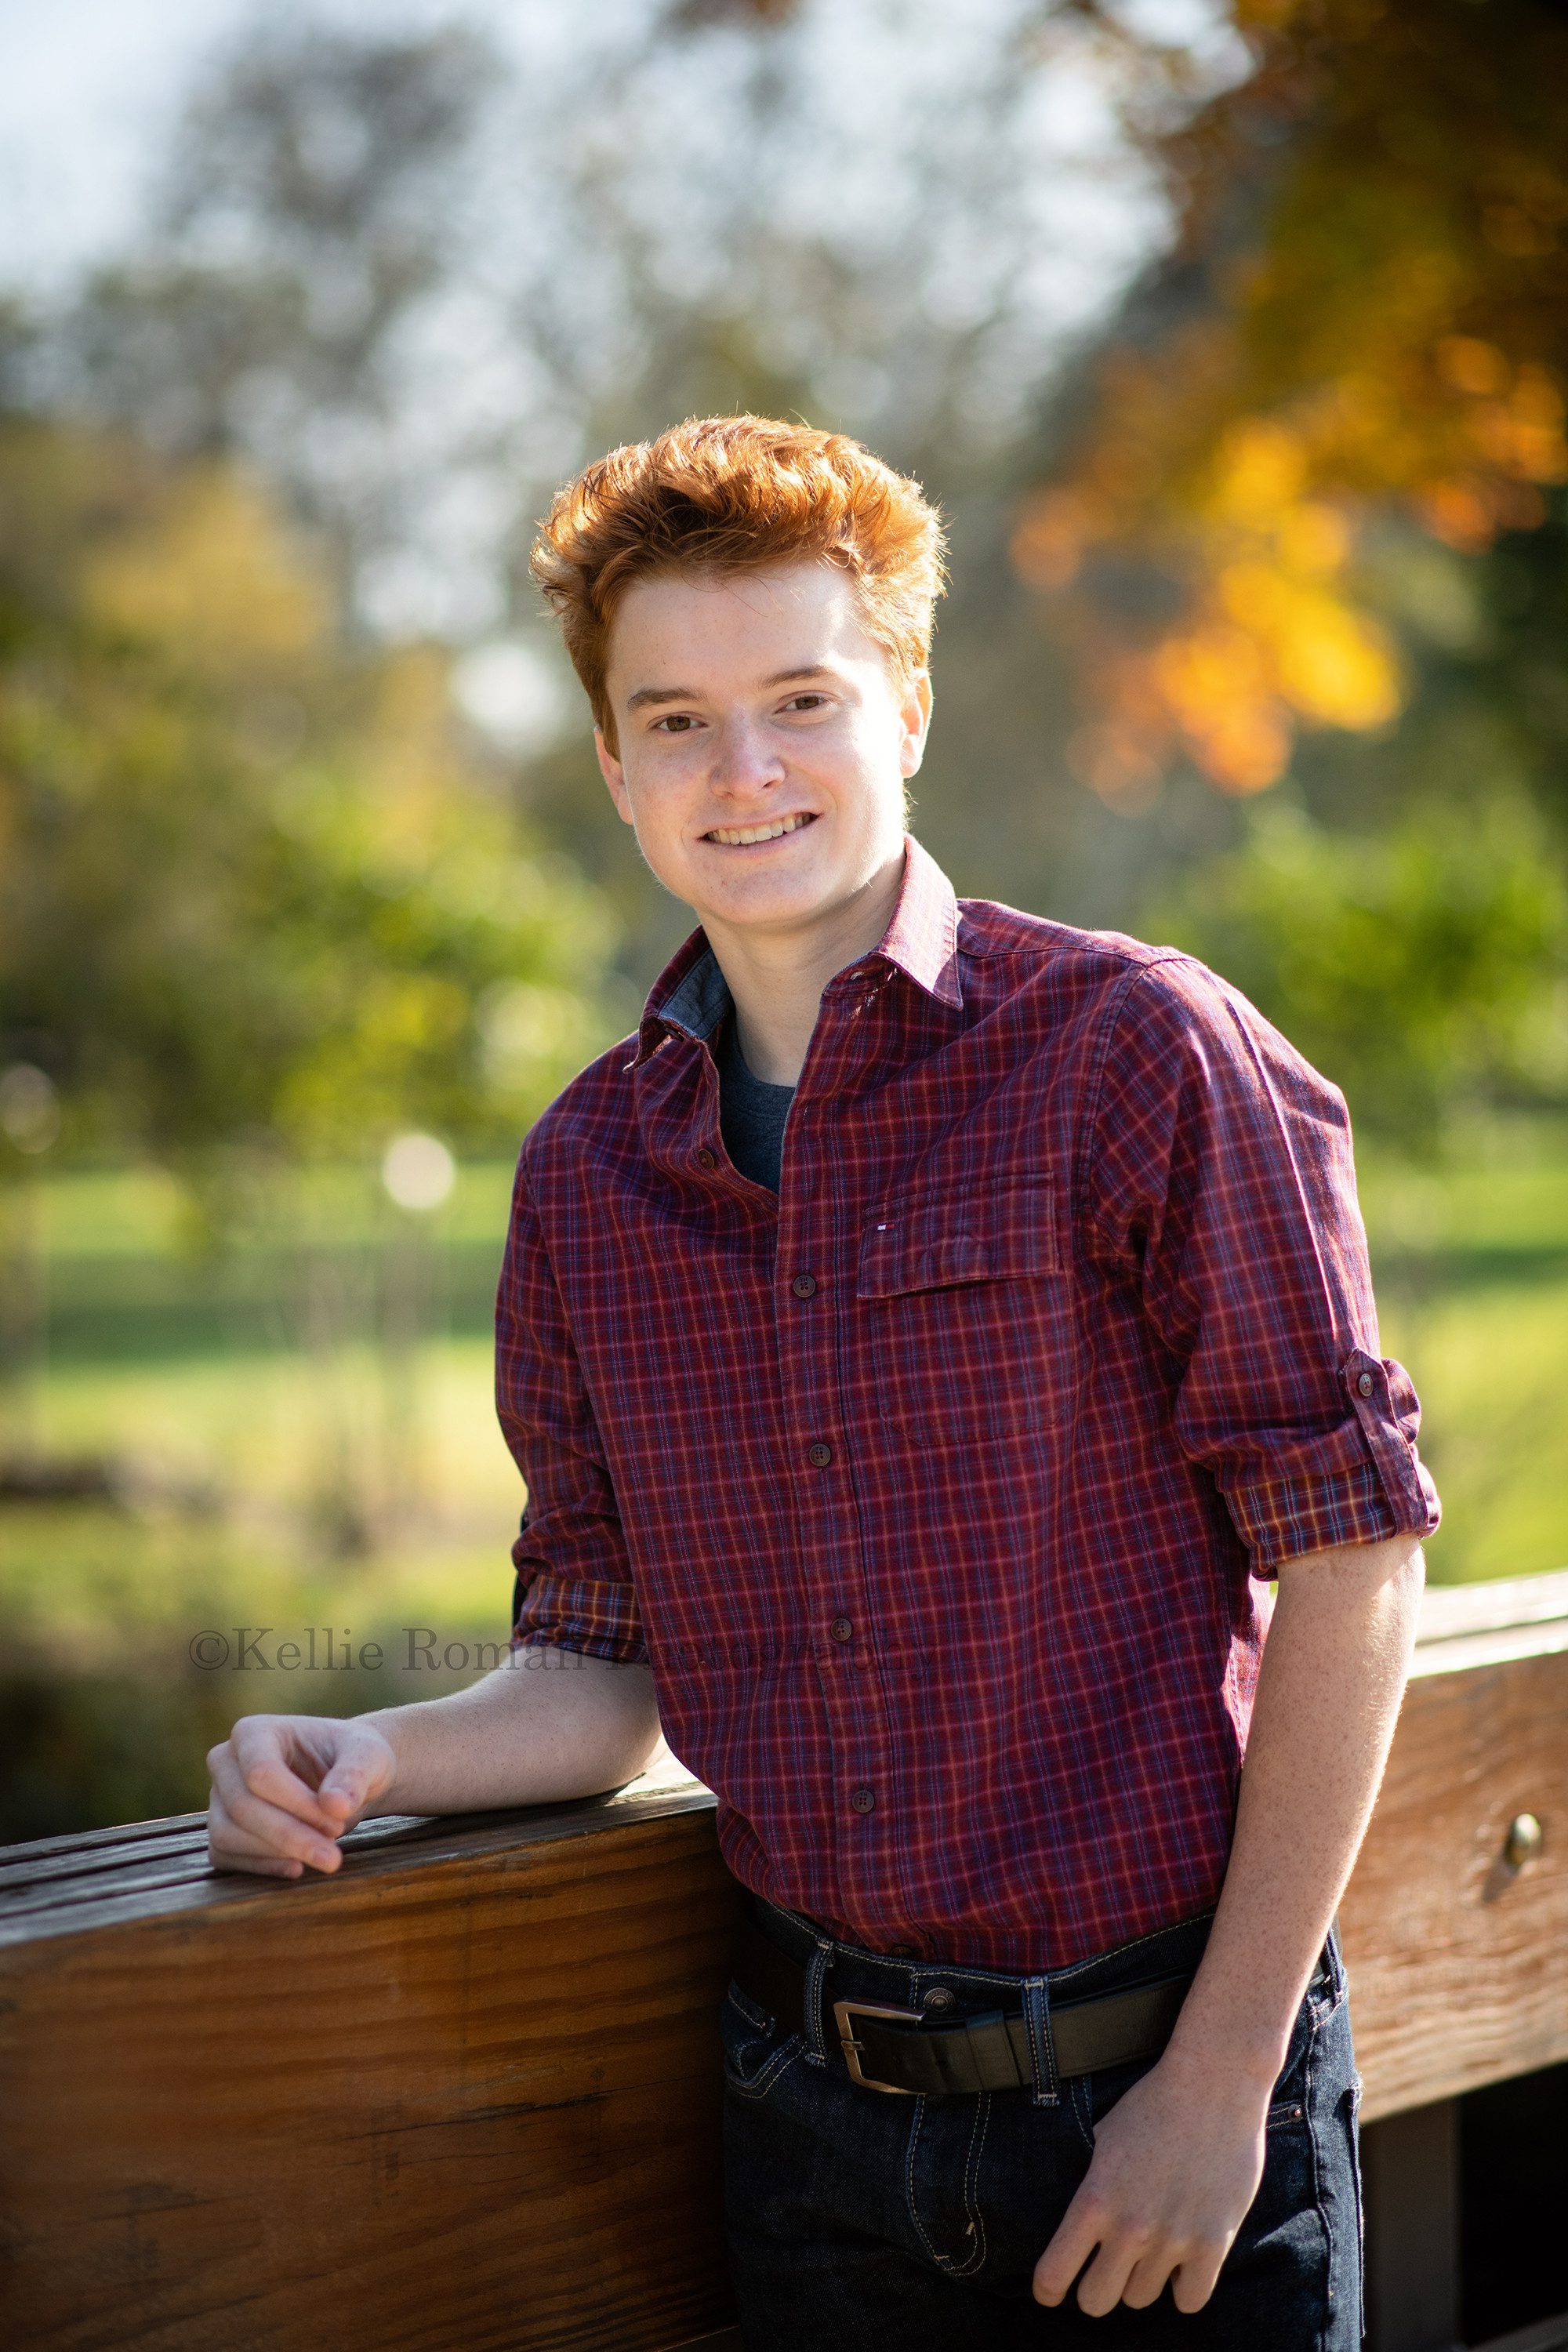 milwaukee photographer a young high school senior boy standing leaning against a wood bridge at a kenosha park he has on jeans and a red checkered shirt he has his one thumb in his pocket and the other arm resting on the bridge he's smiling at the camera and has red hair